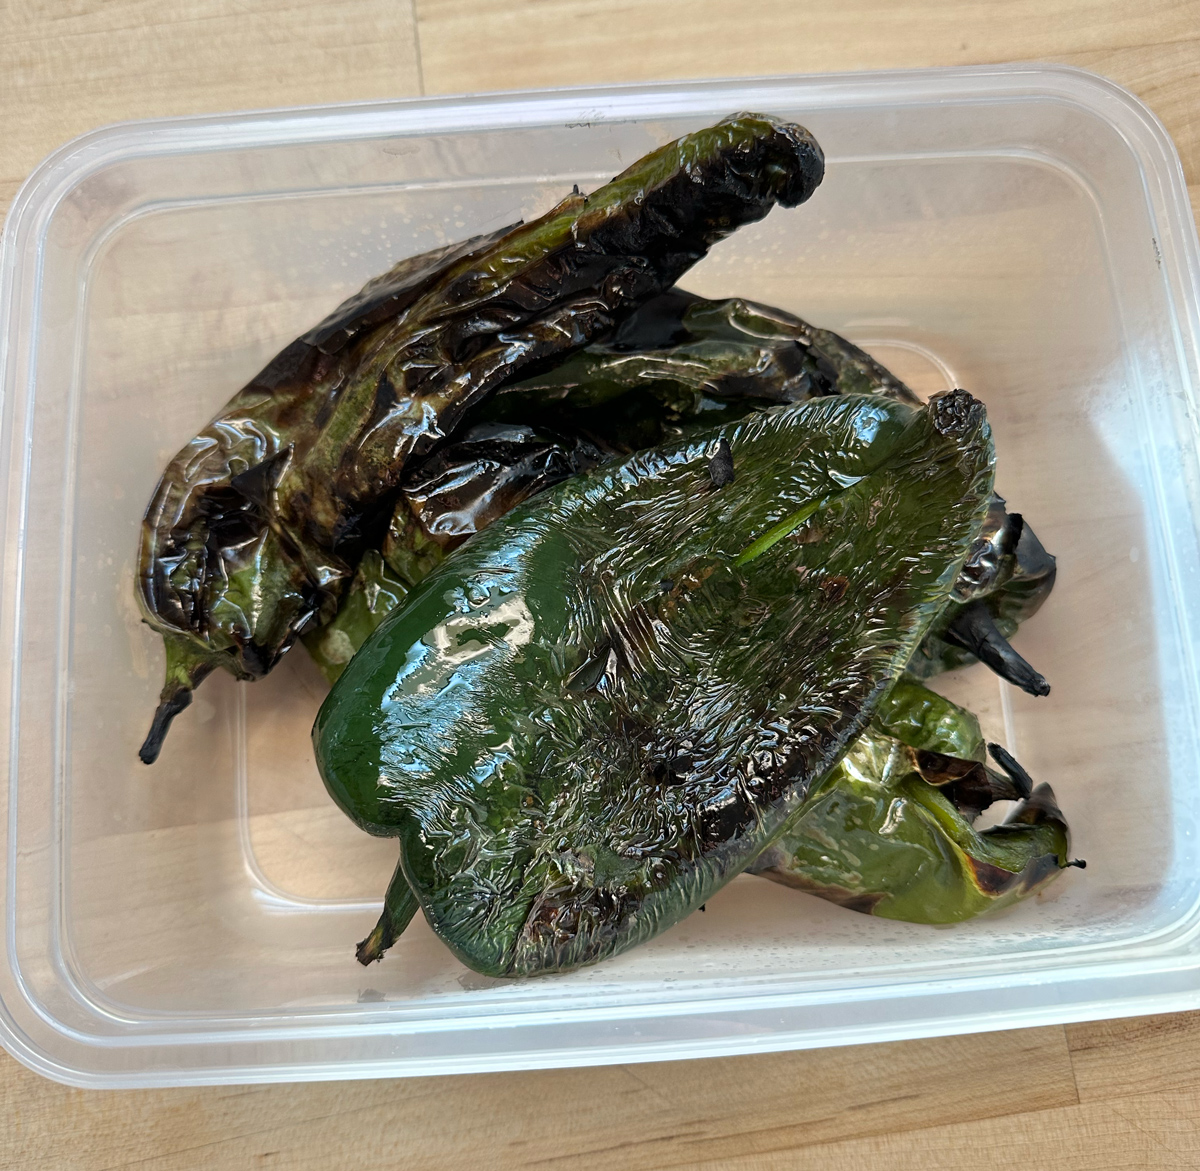 Charred Chiles for Chile Verde